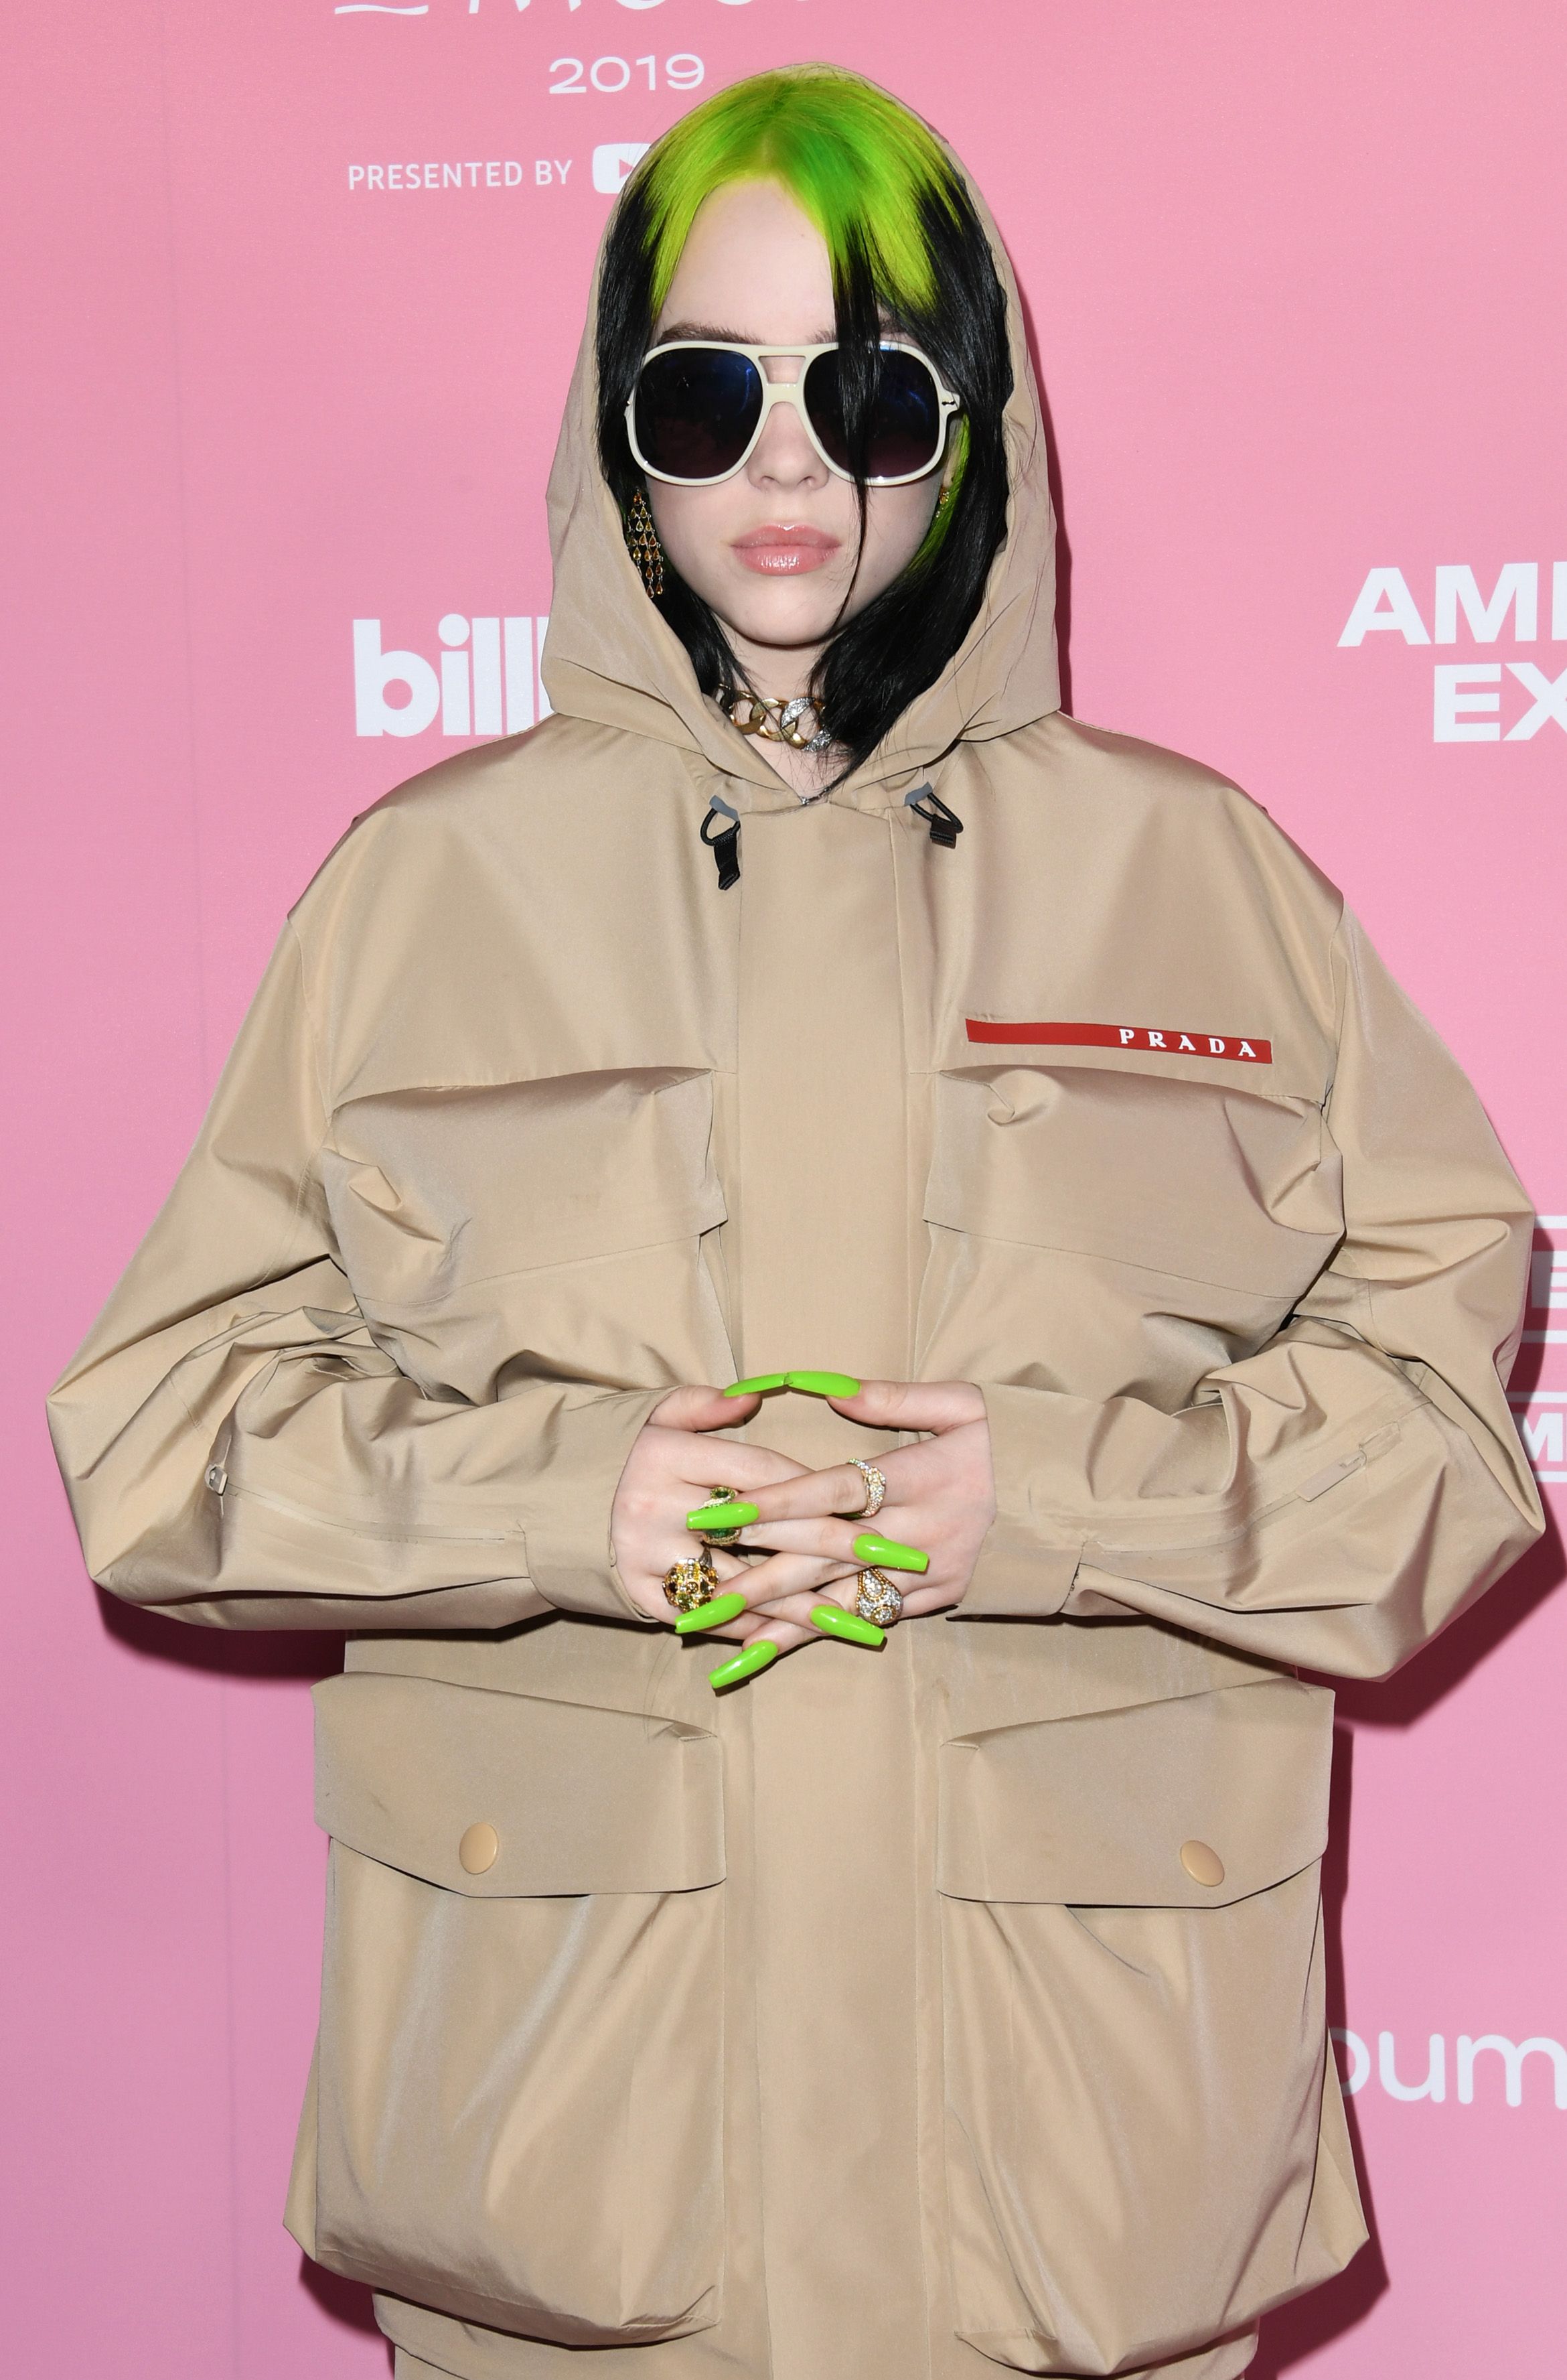 Billie Eilish bravely confronts self-harm issues in documentary